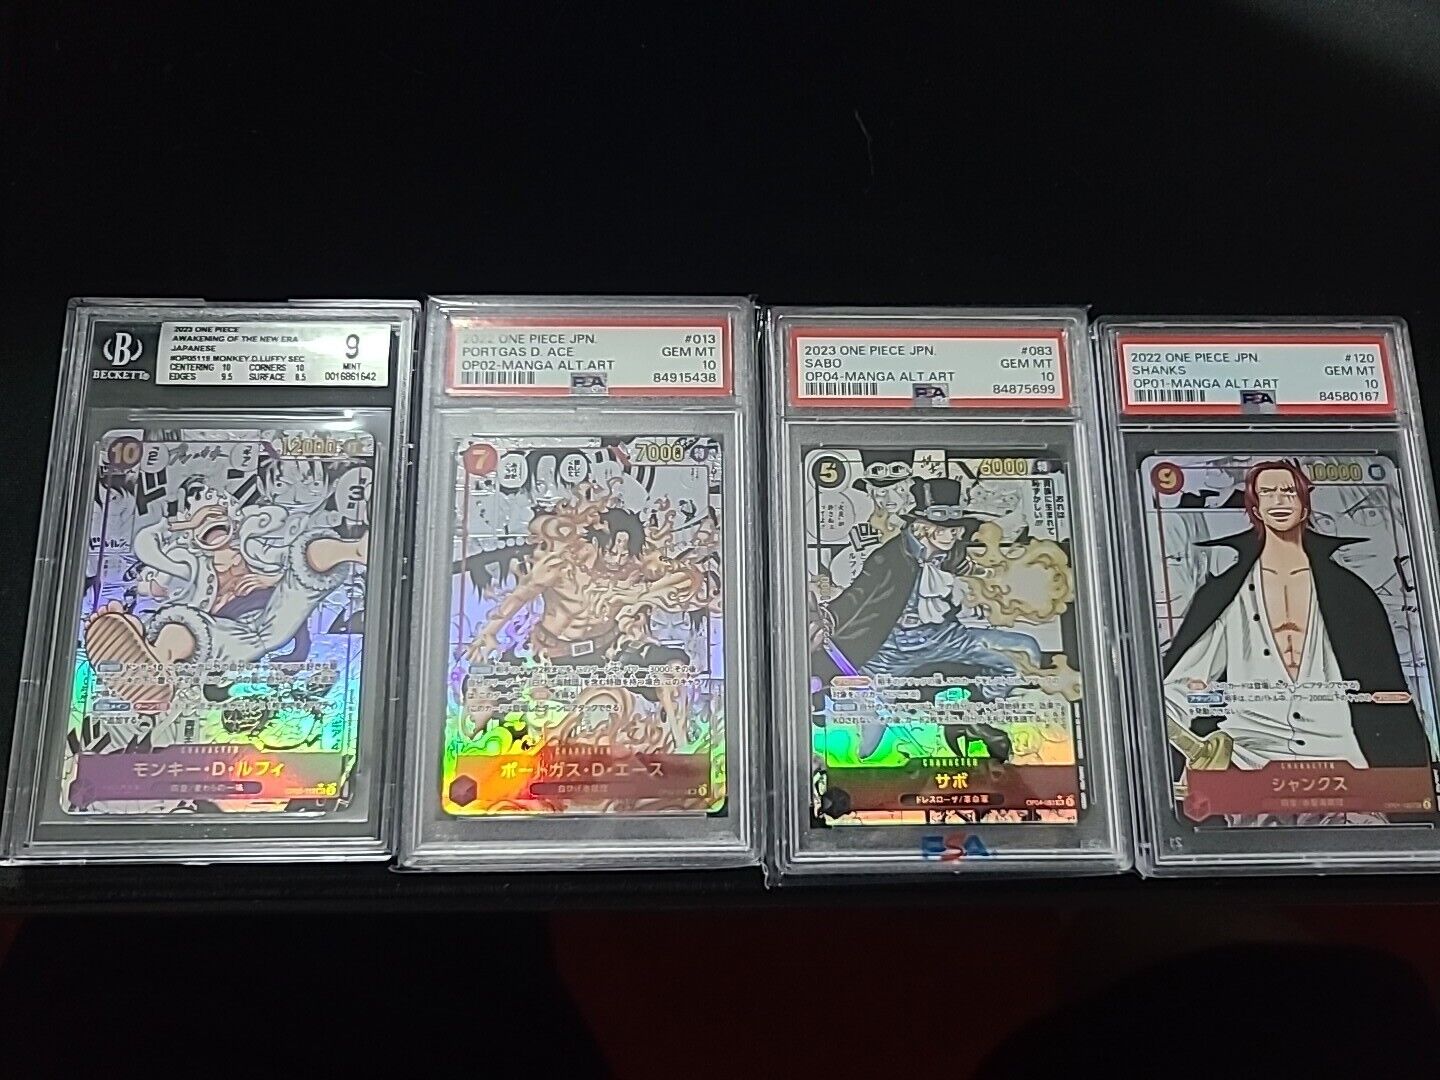 One Piece TCG MANGA (GRADED) Luffy, Ace, Sabo, Shanks. Bidding On All FOUR Cards